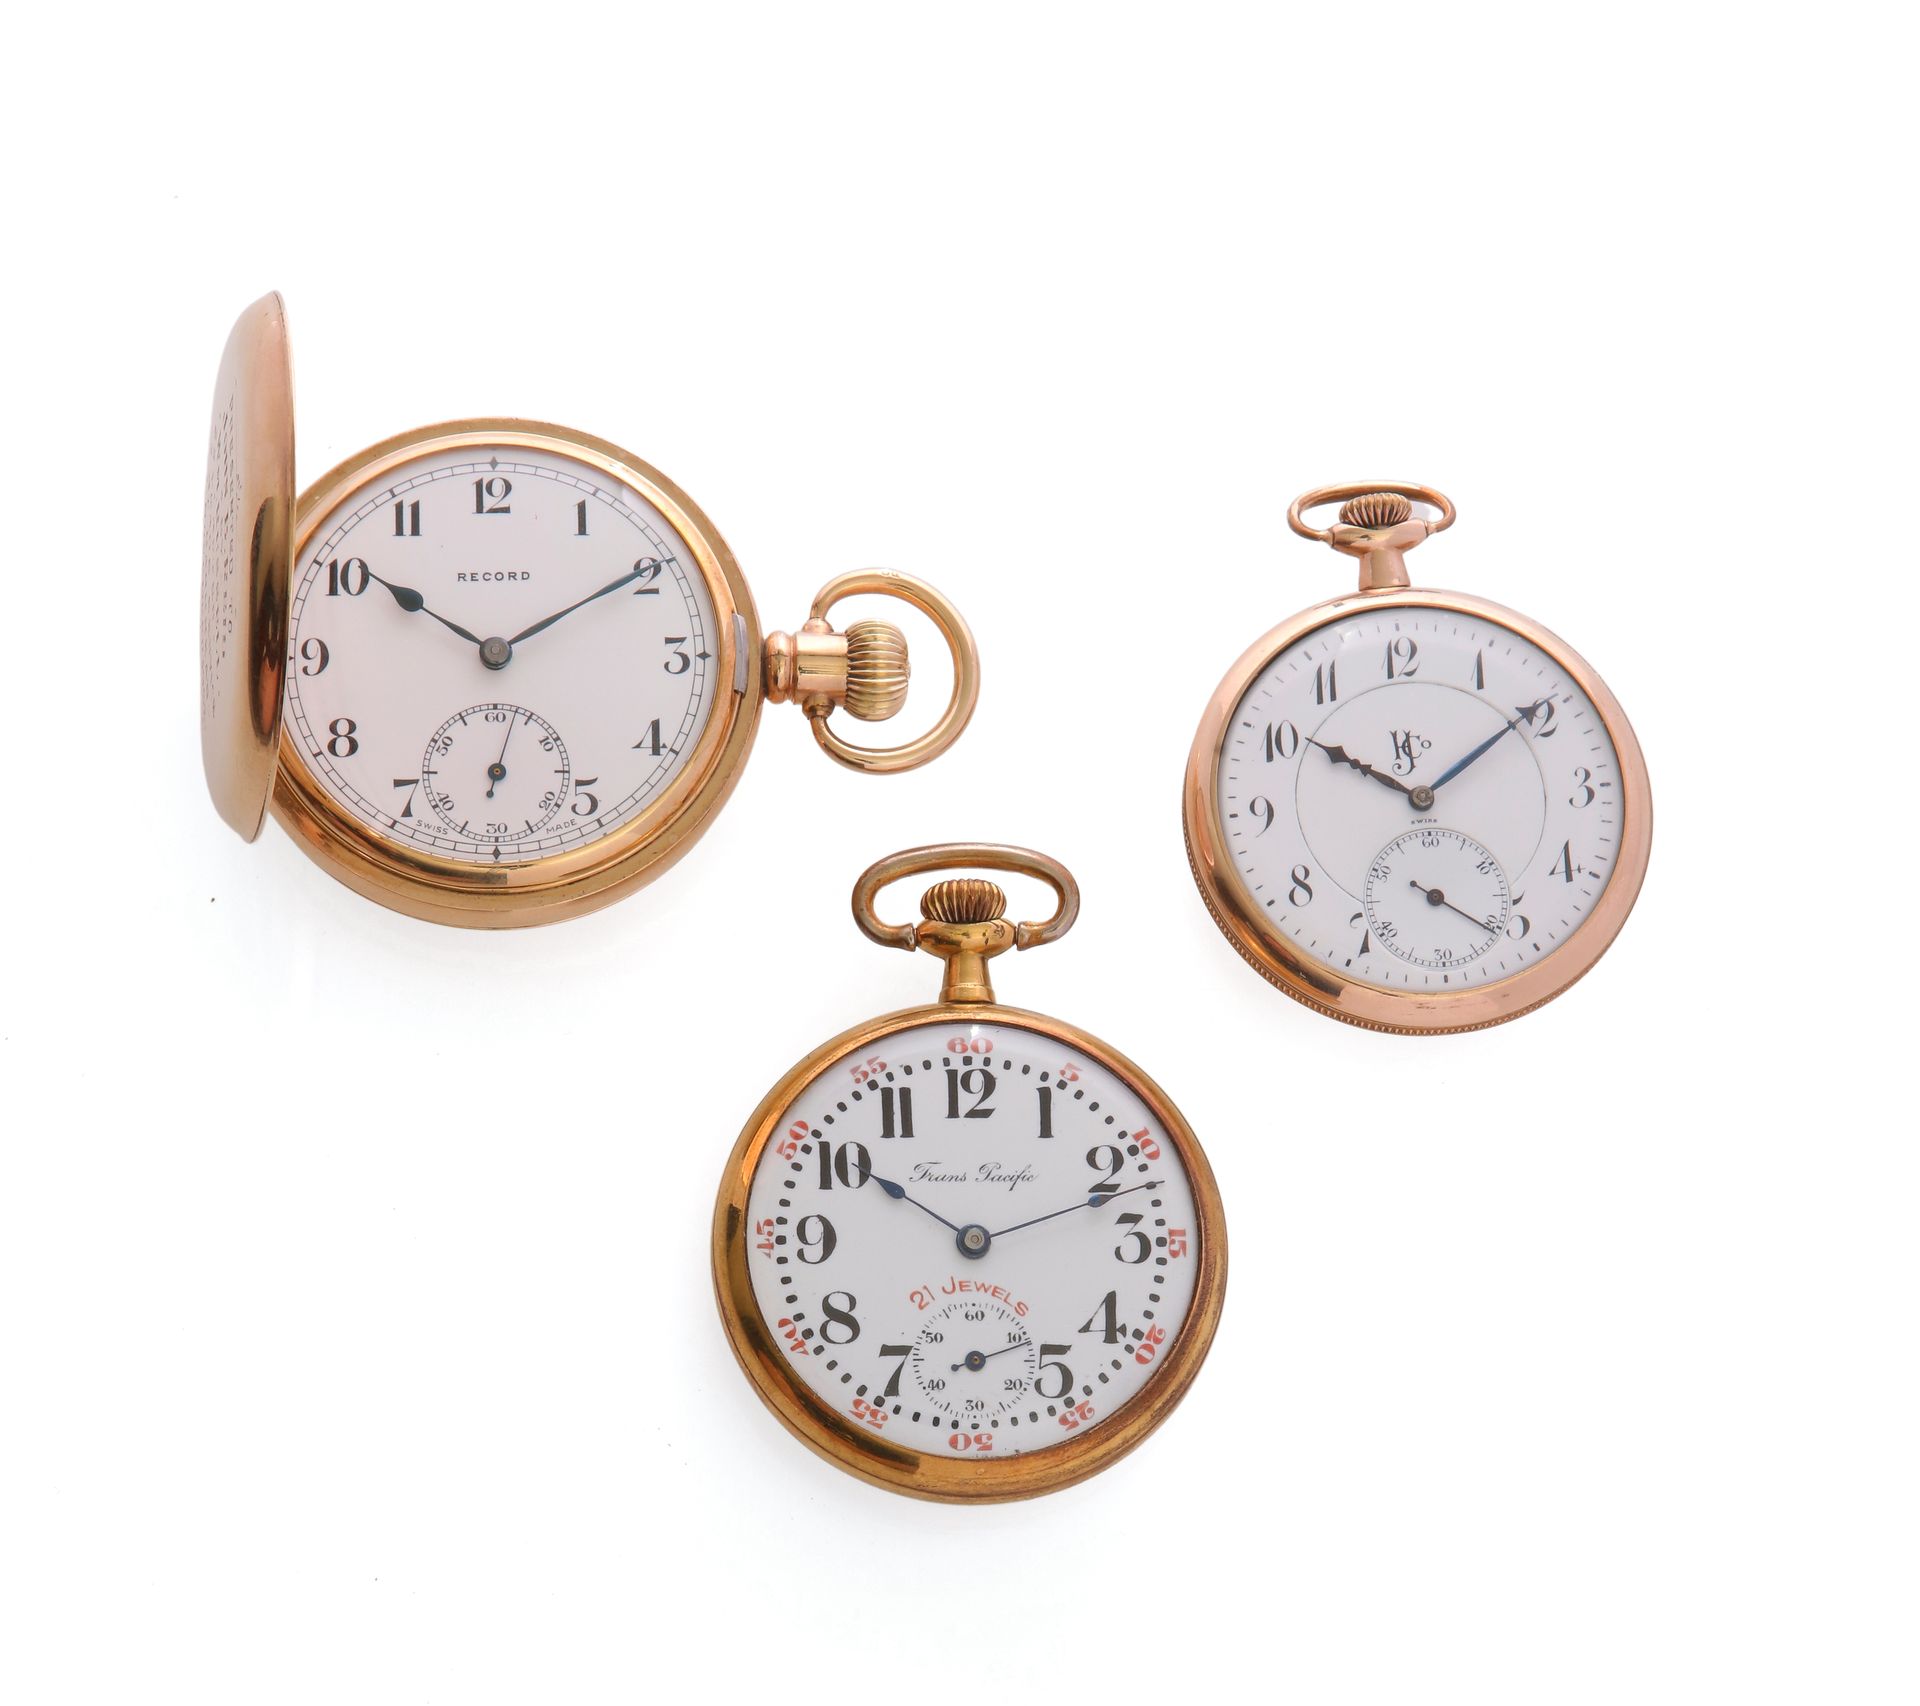 Null Record / Trans Pacific / HJCO
A set of 3 gold-plated pocket watches, all wi&hellip;